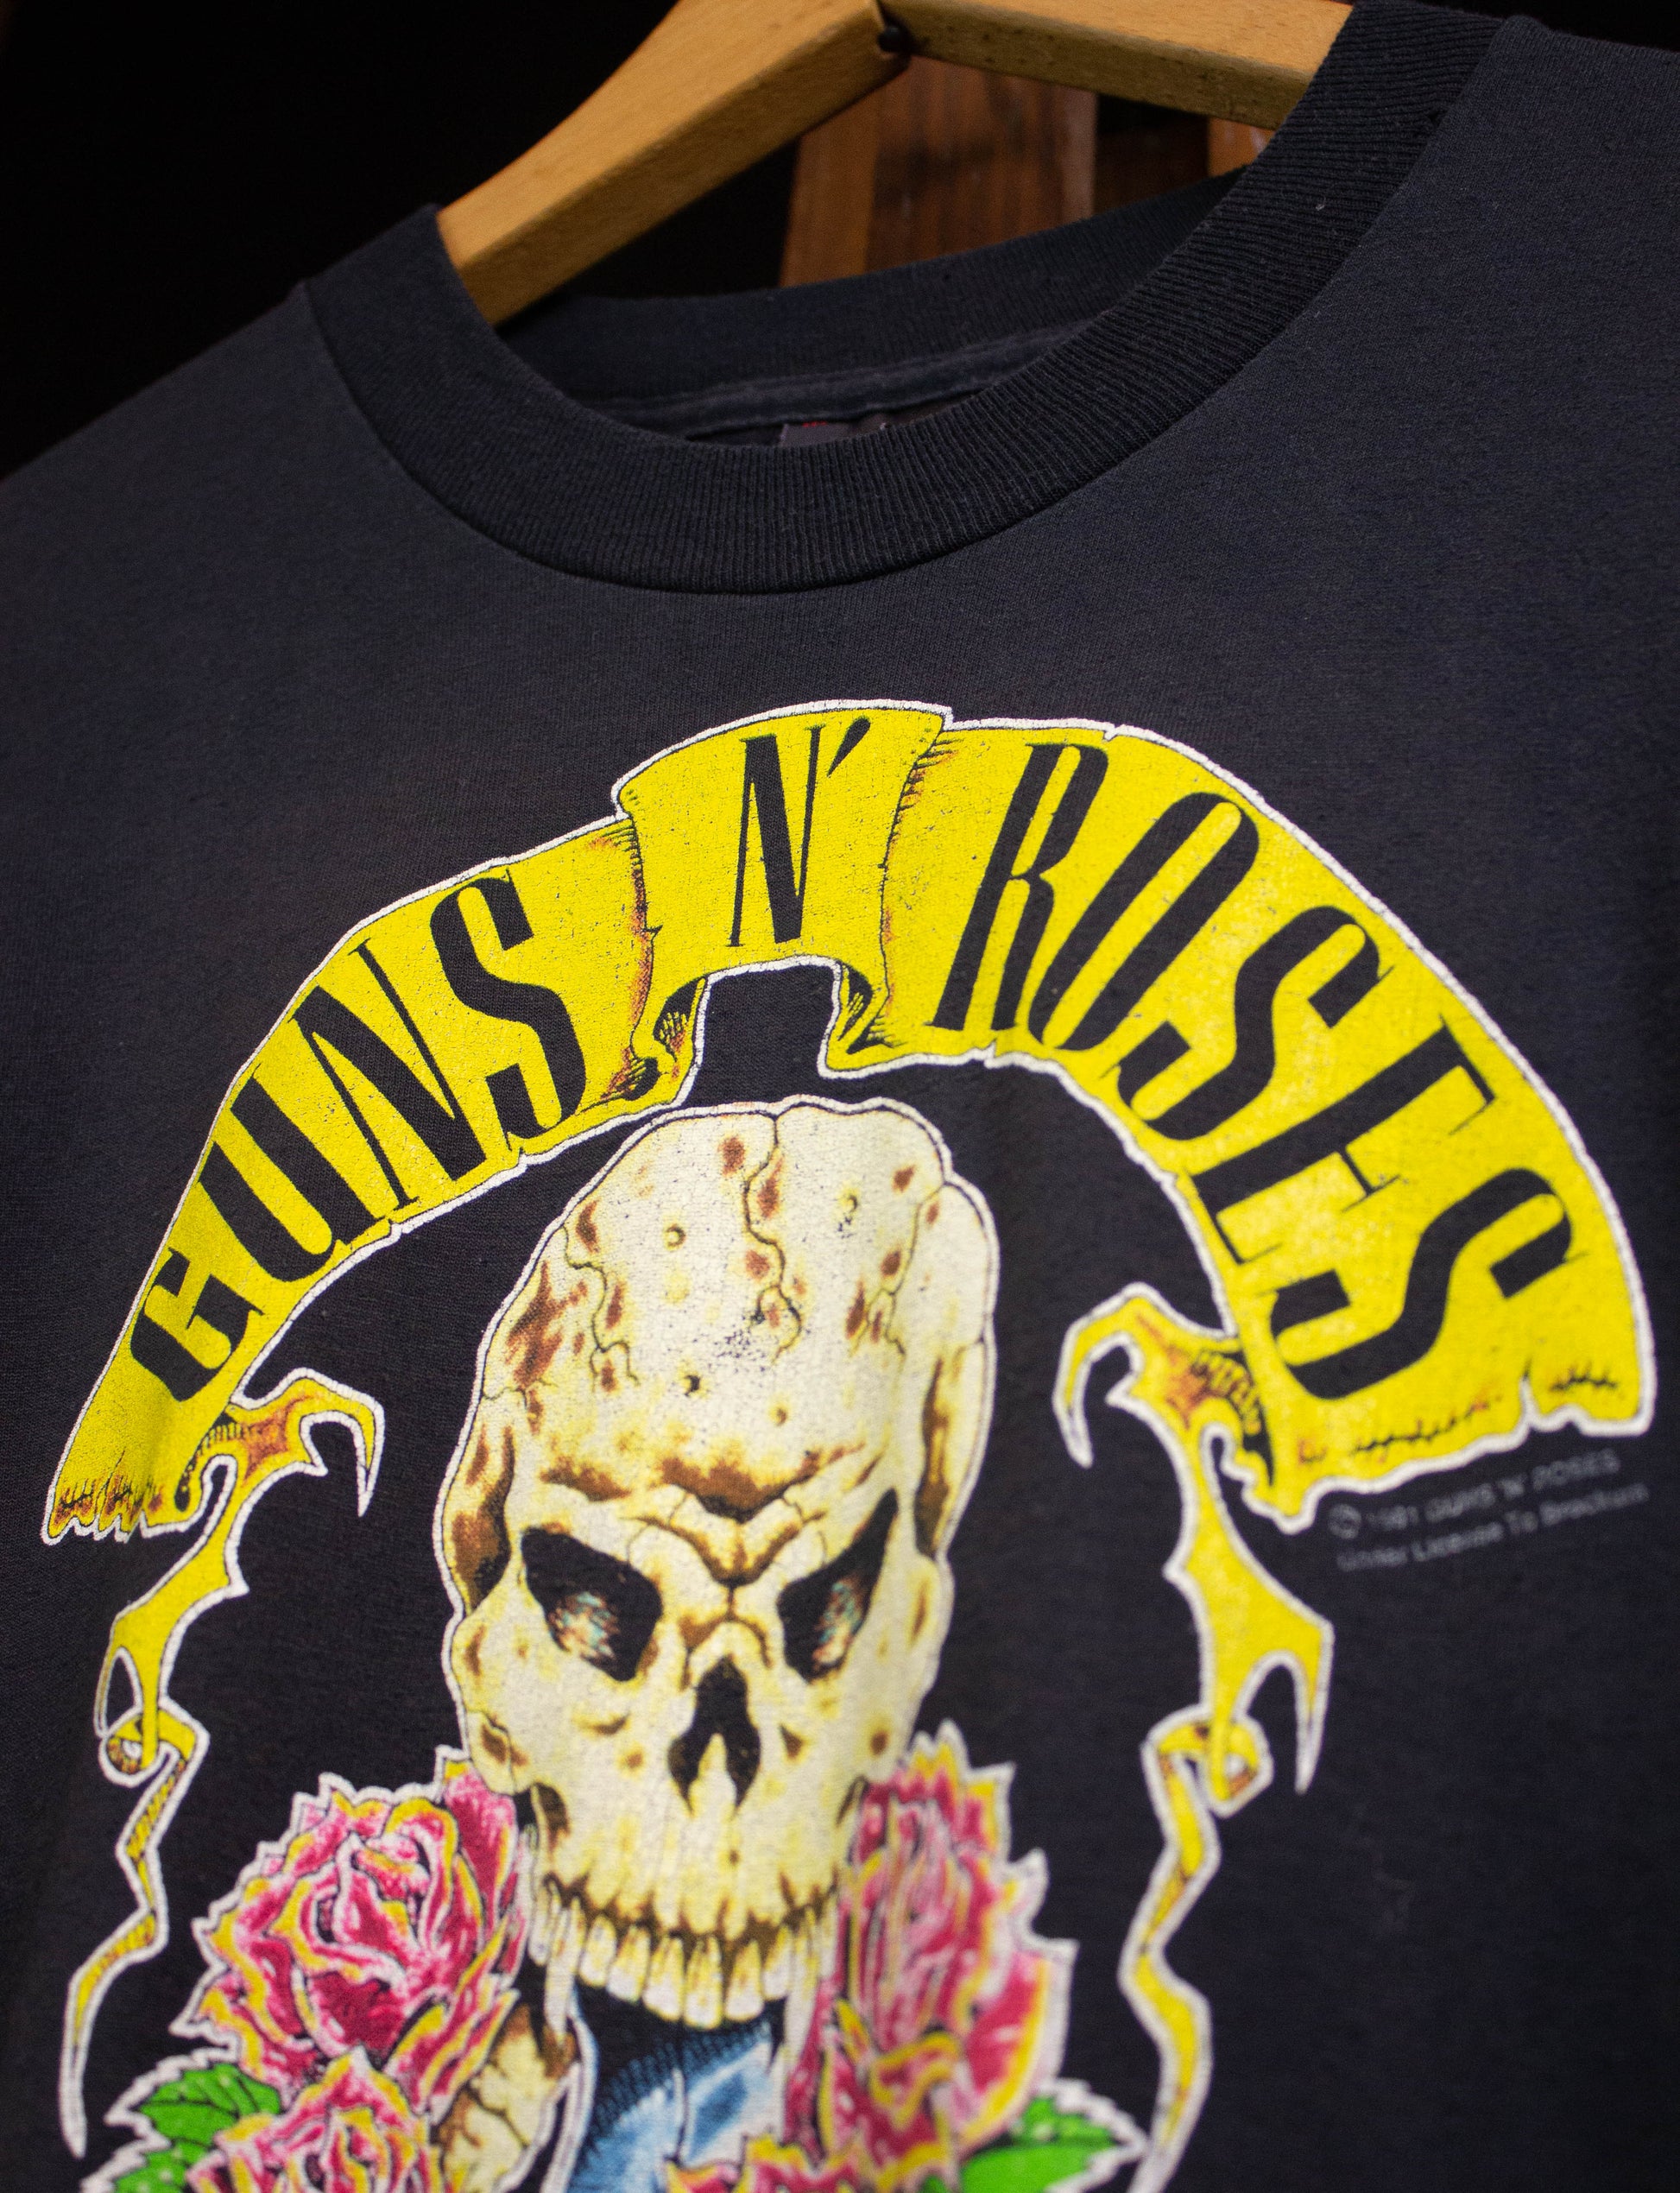 Vintage Guns N Roses Concert T Shirt 1991 Here Today Gone To Hell M